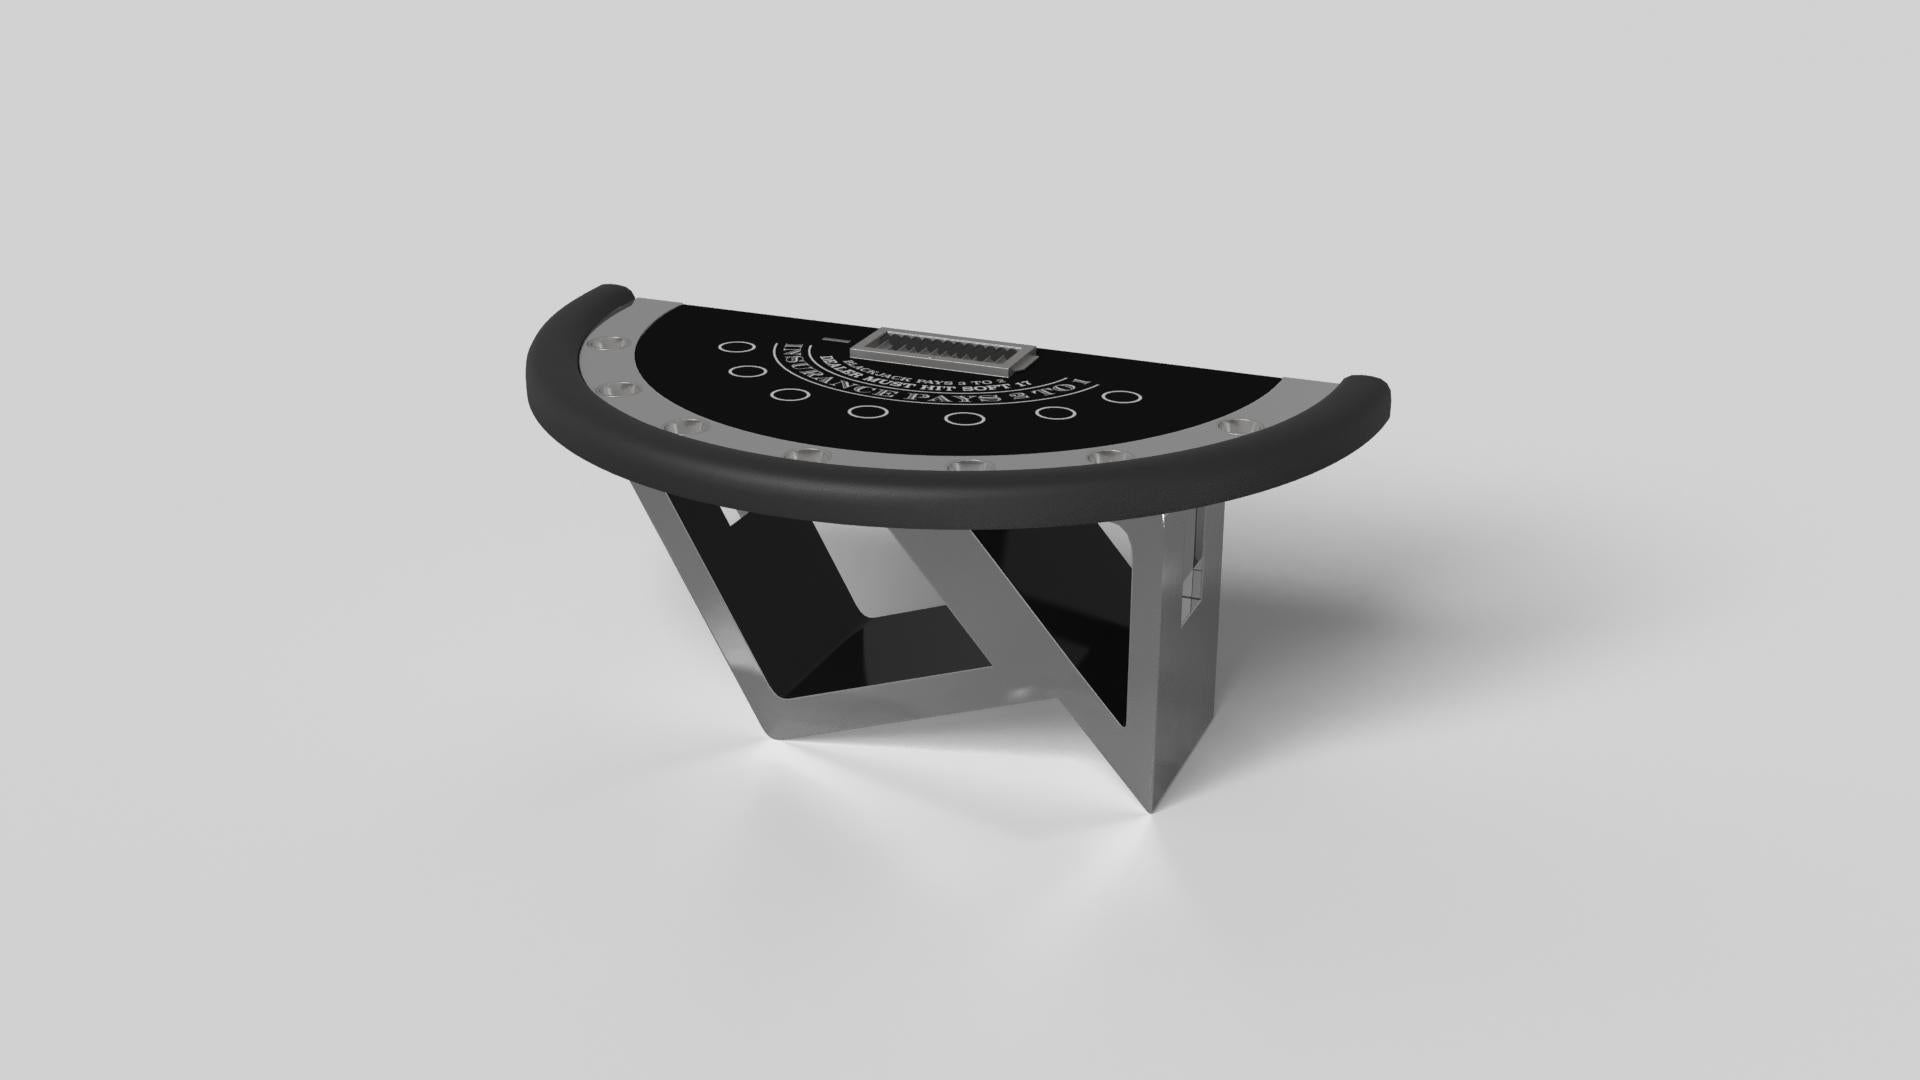 Drawing inspiration from the beauty of geometric forms, the Rumba blackjack table in brushed aluminum is characterized by a series of hollow and solid shapes that form an offset asymmetric base. Accented with a chip rack and betting circles for